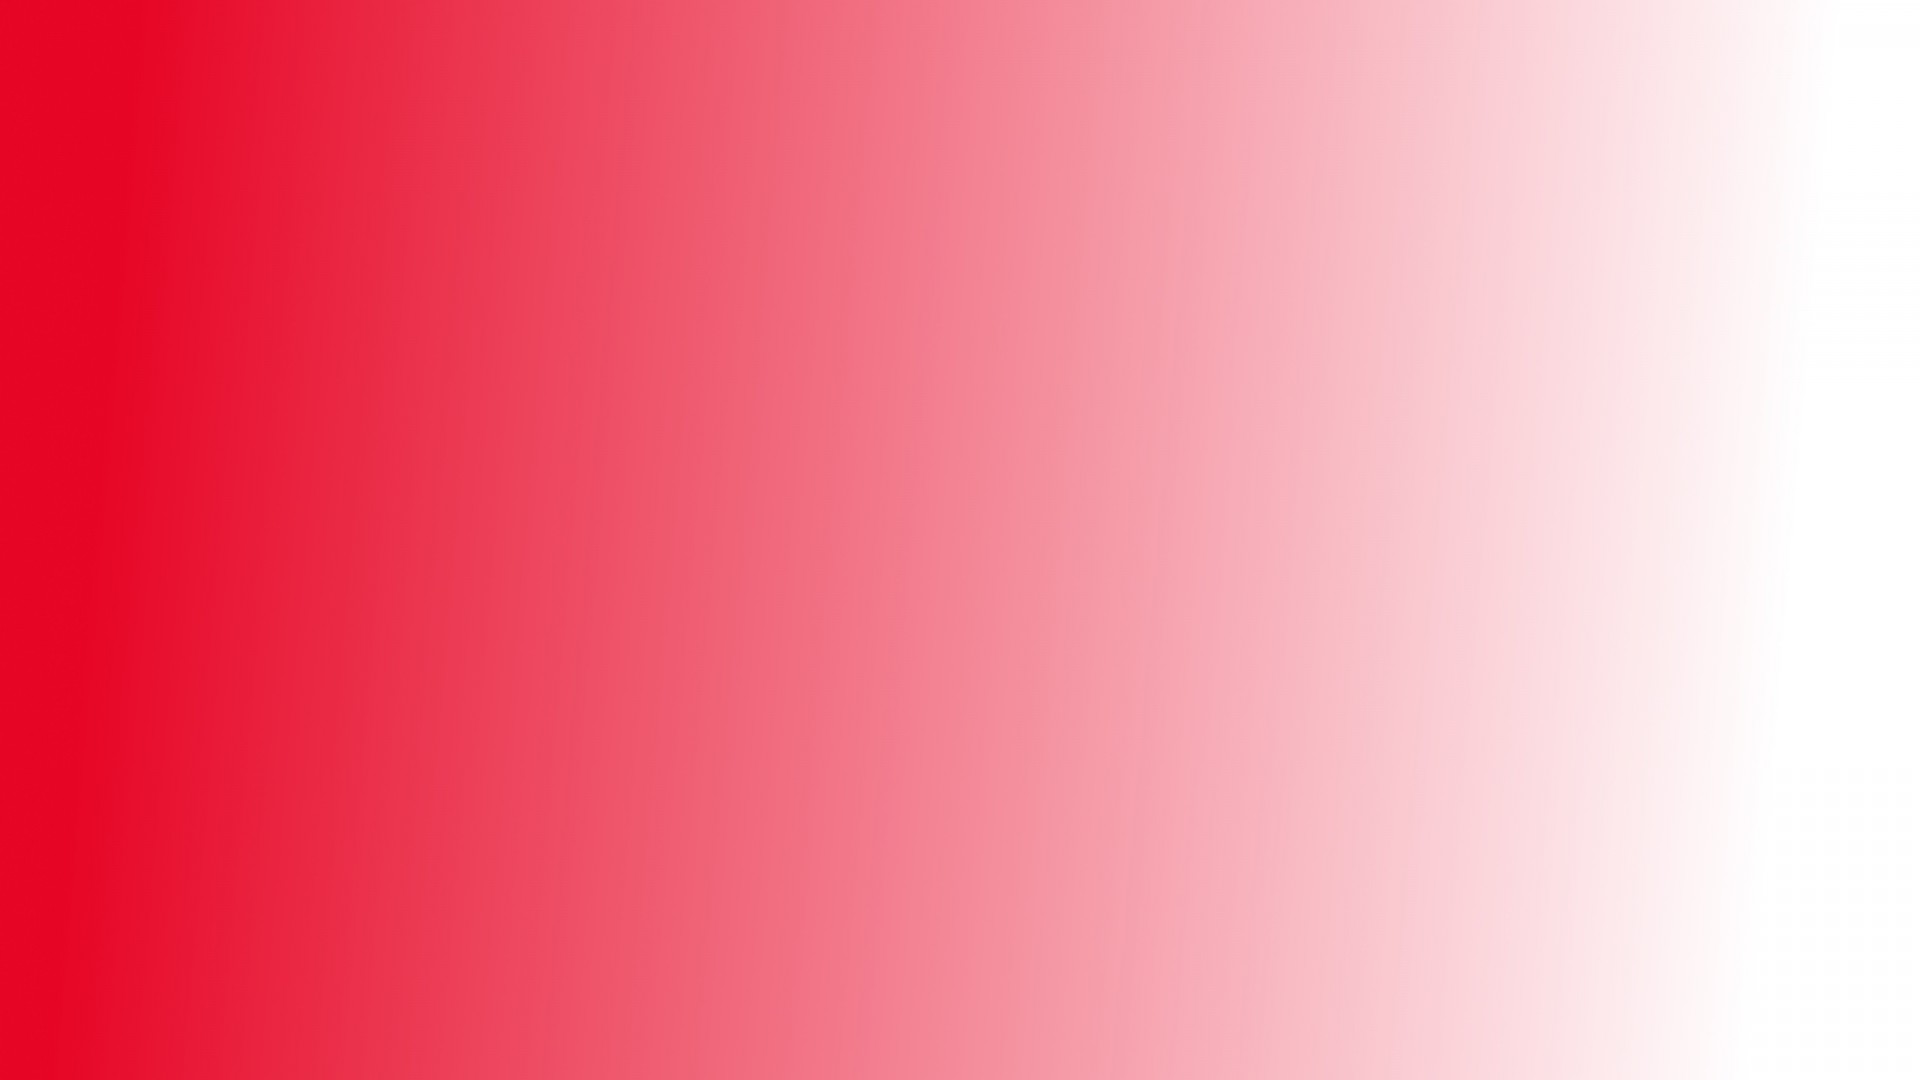 Pink and White Red Gradient Download